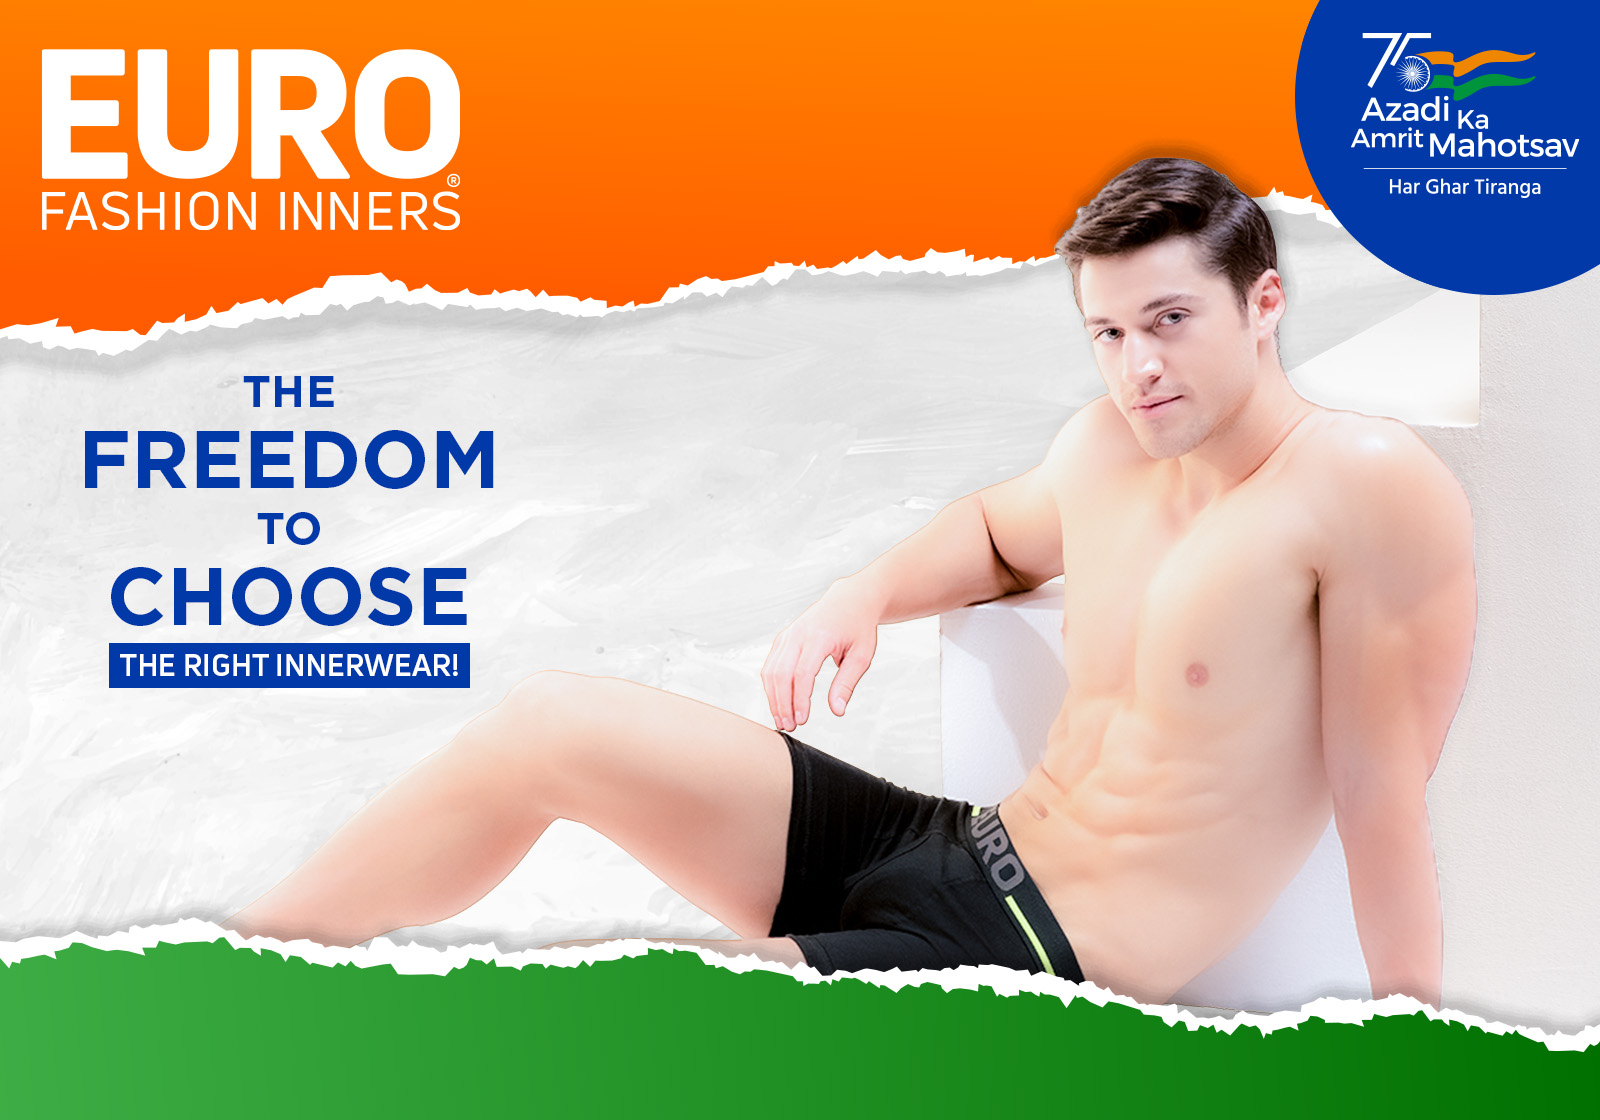 The Freedom to choose the right Innerwear!